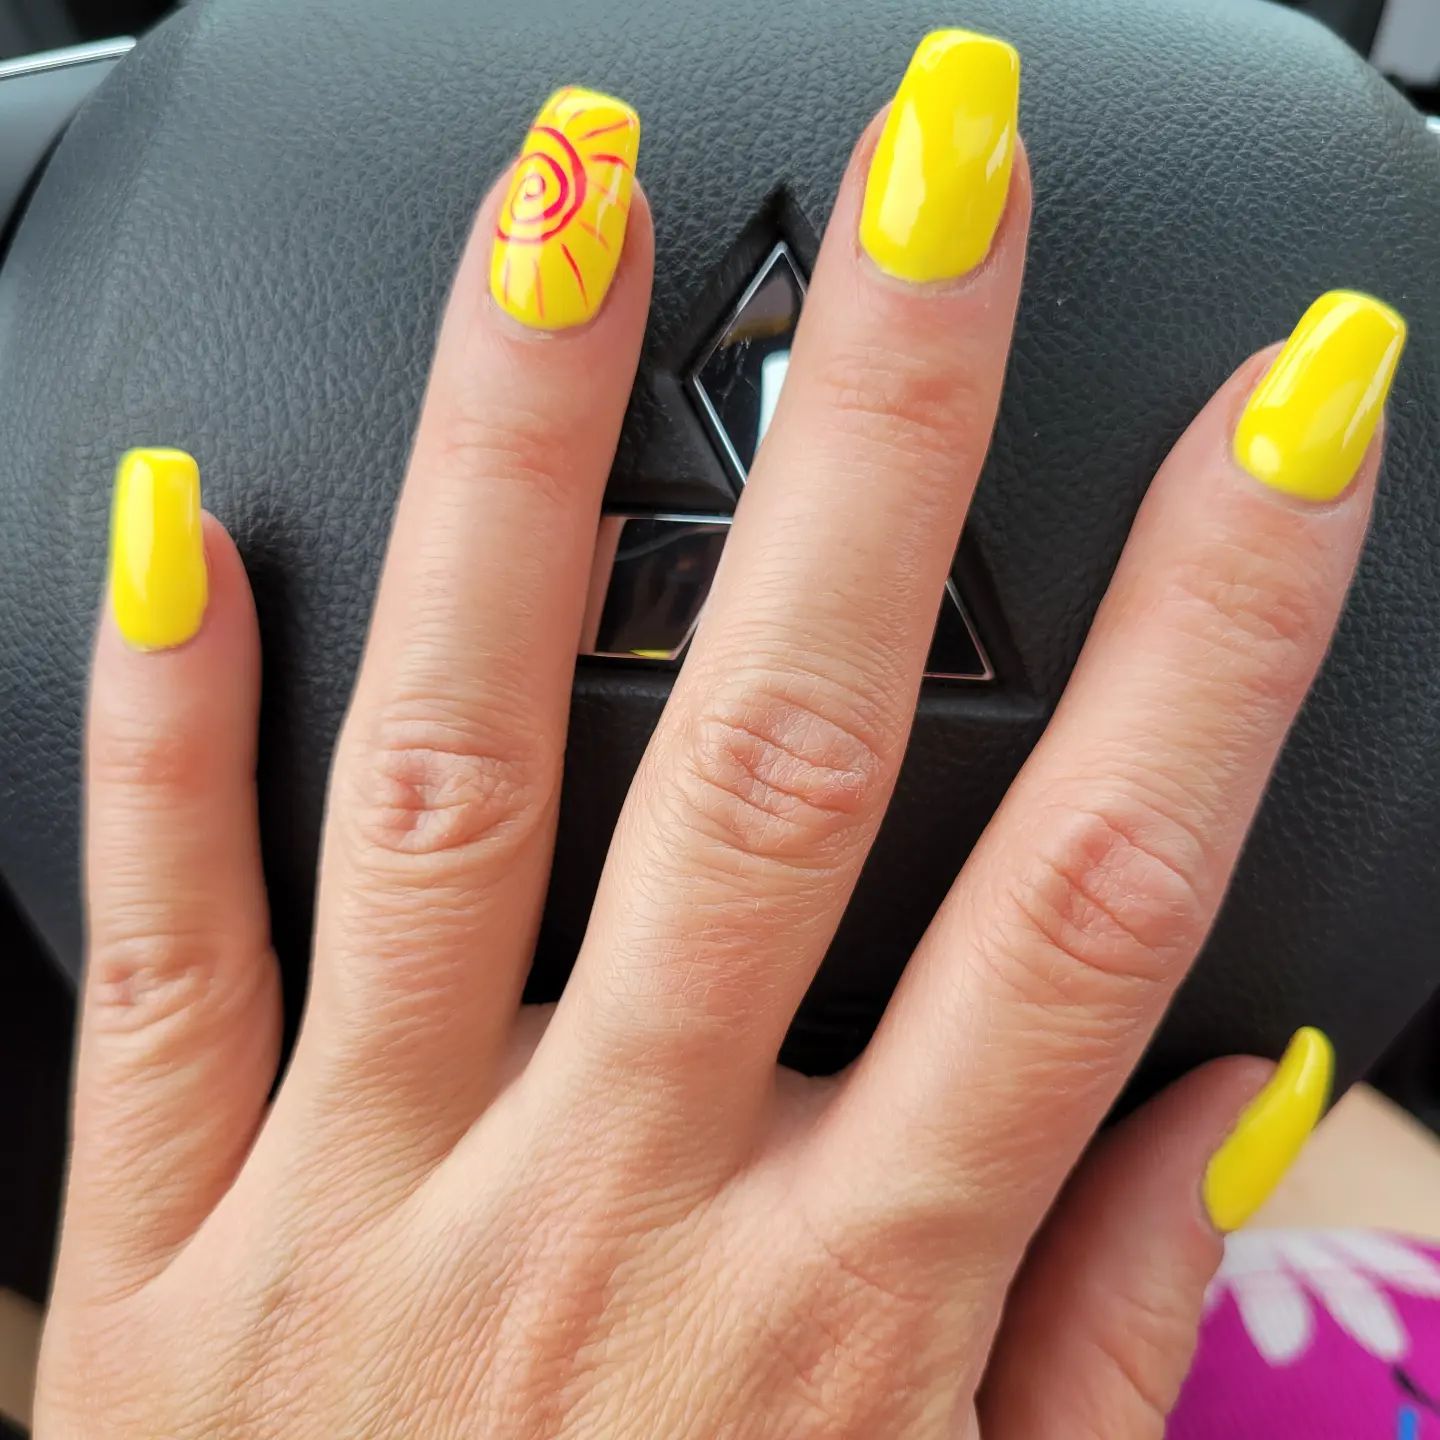 The color of Sun, yellow, is a great choice to apply for your summer nails. Plus, you can draw a sun for your accent nail.